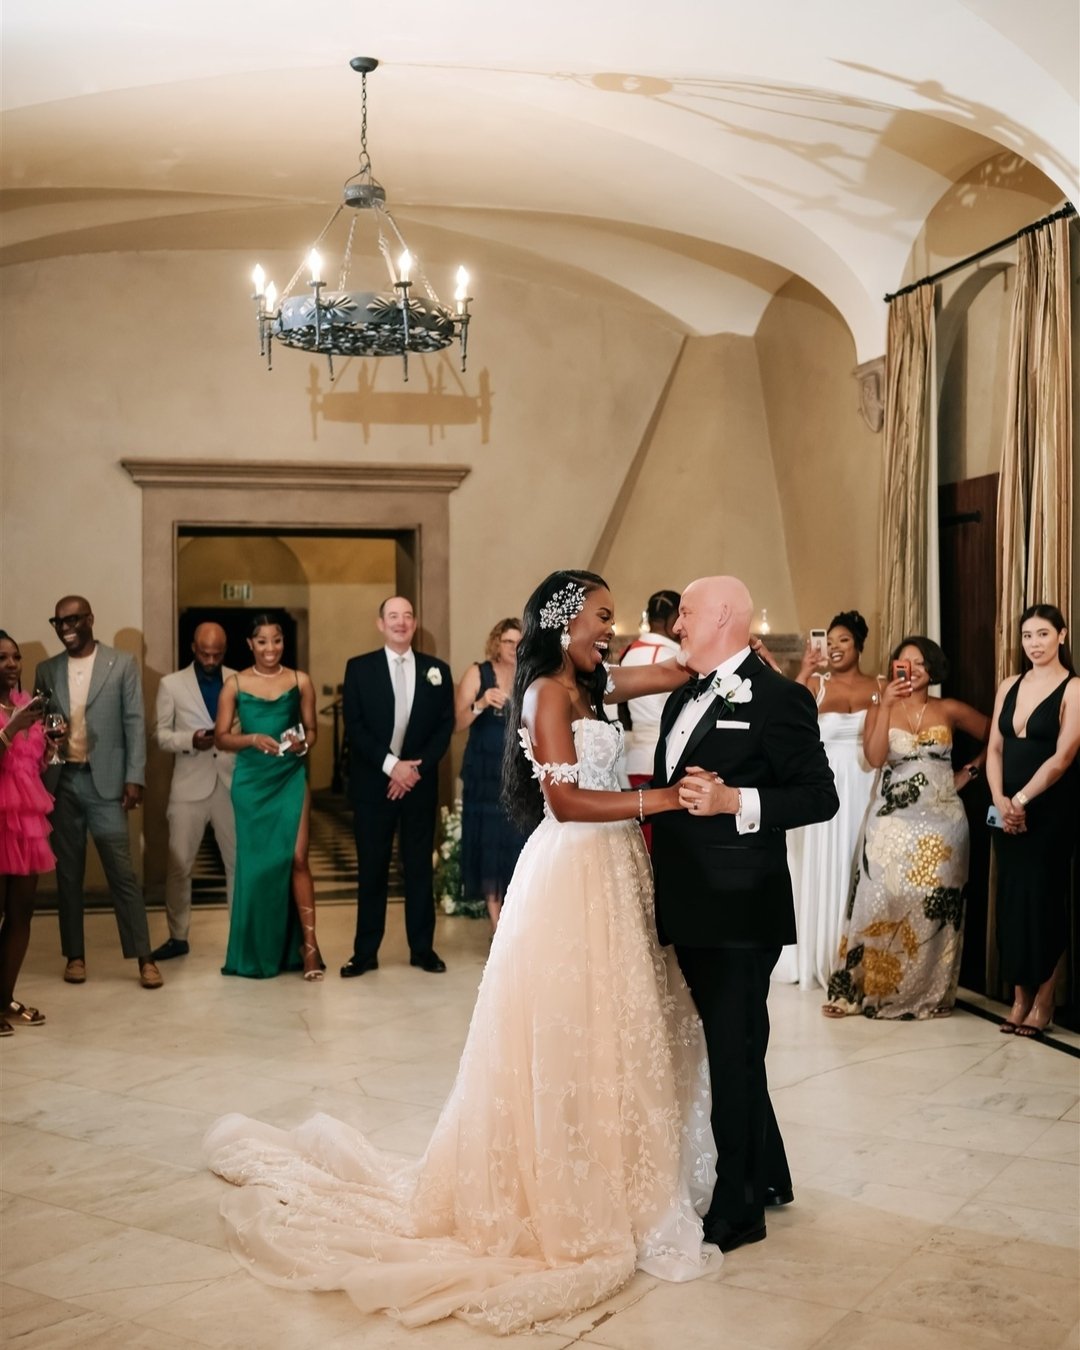 At @villadelsoldoro, you have the option of having your dance floor either indoors or outdoors. K+D chose to have theirs indoors in the long ballroom space with their guests surrounding them in love. Such a sweet moment for these newlyweds. 

@villad